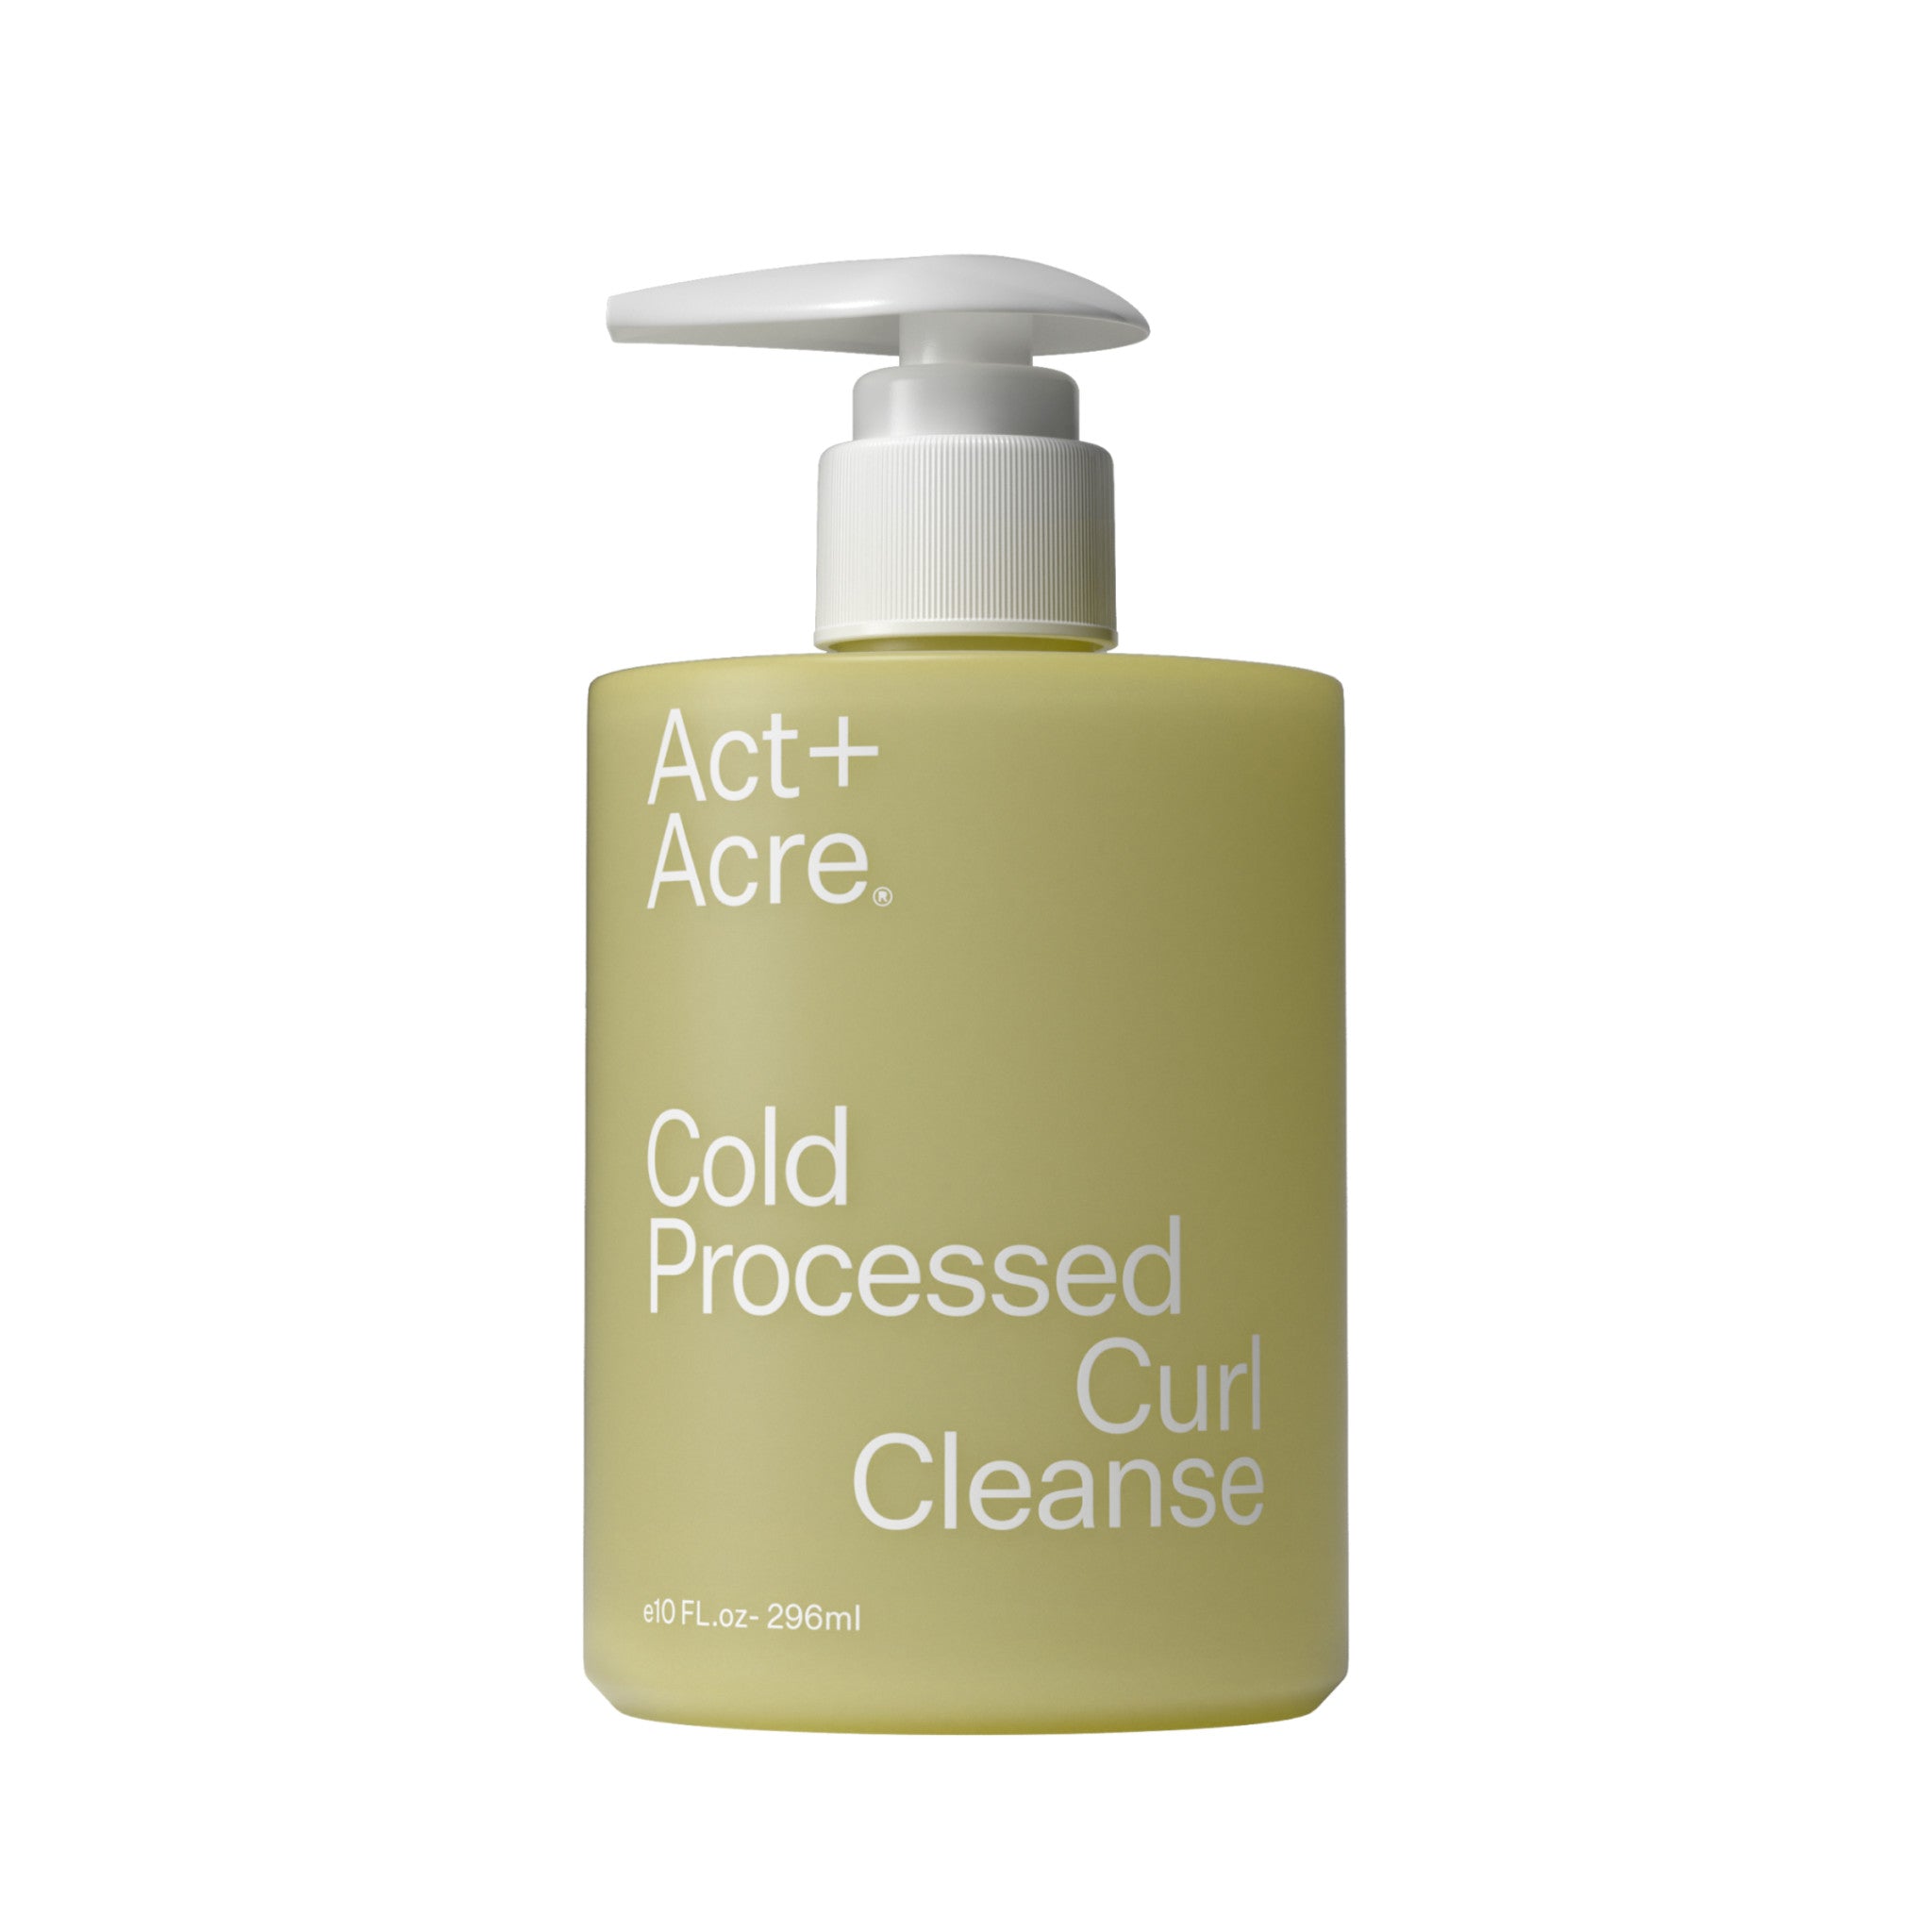 Act+Acre Cold Processed Curl Cleanse Shampoo main image.